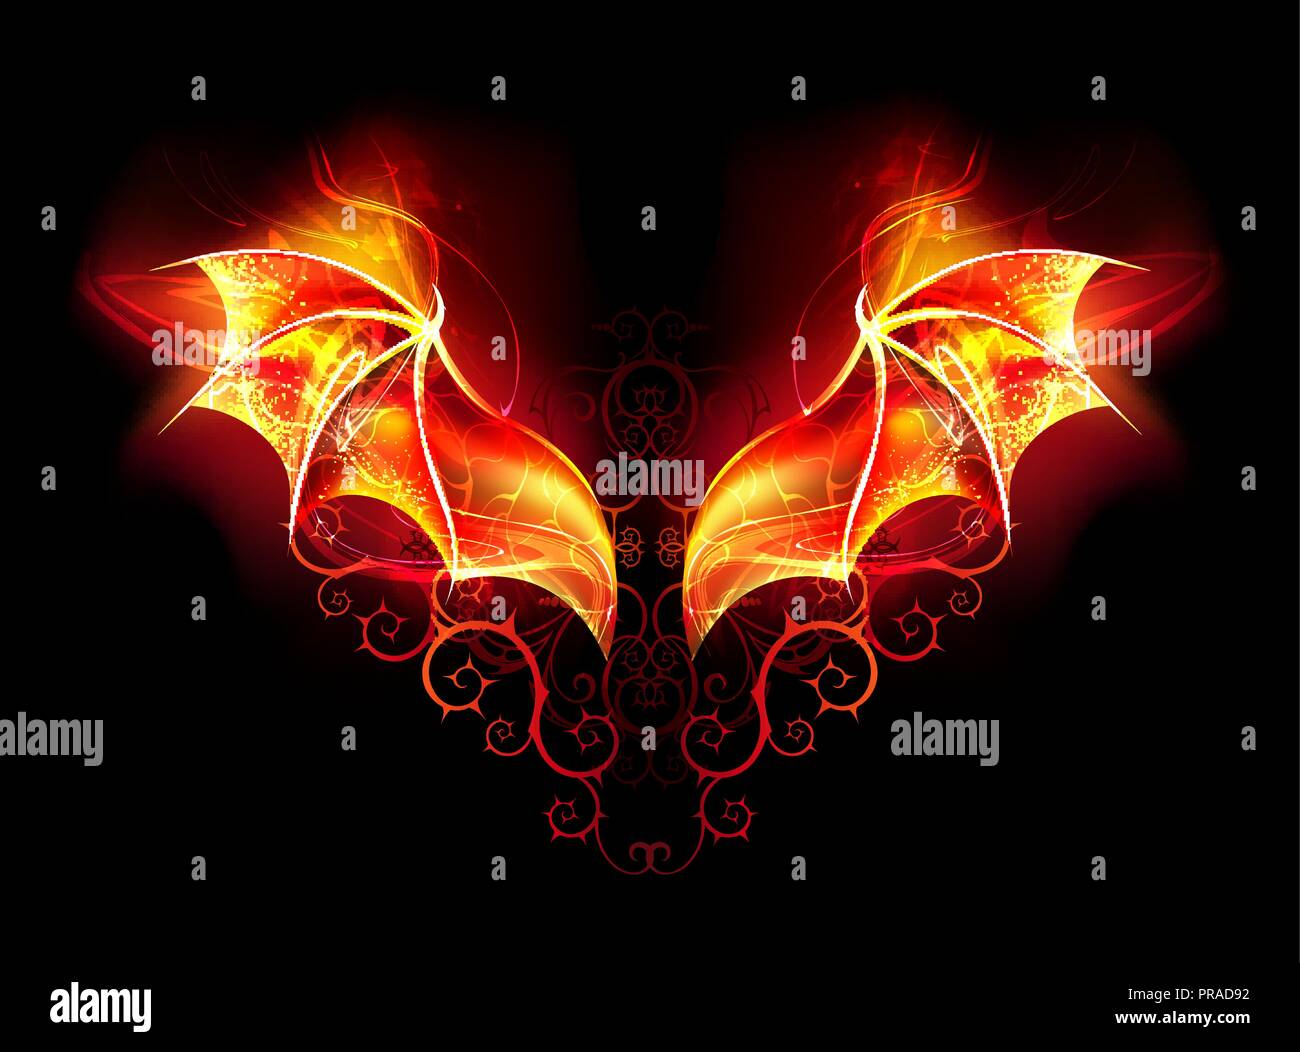 Burning wings of fiery dragon with spiked pattern on black background. Stock Vector